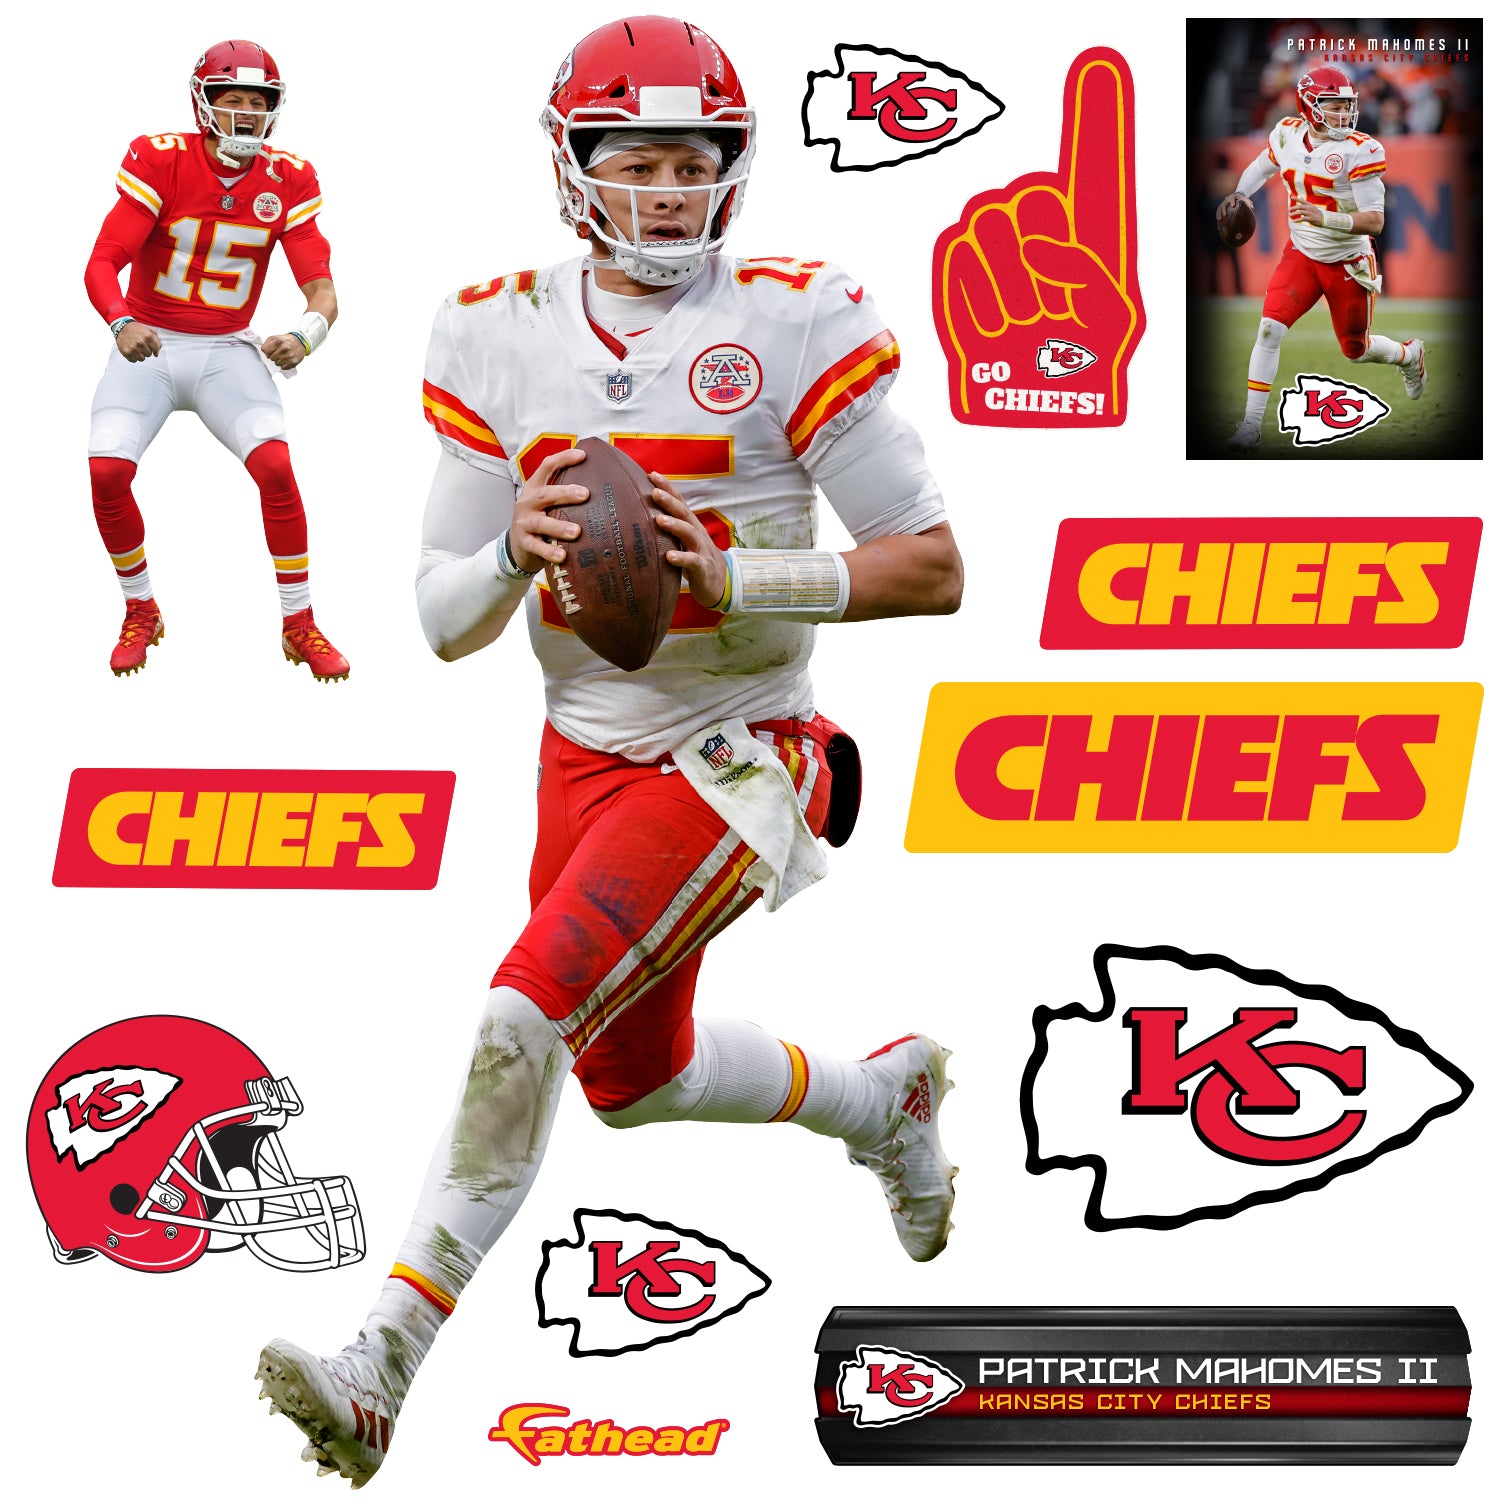 Kansas City Chiefs: Patrick Mahomes II 2022 - NFL Removable Adhesive Wall Decal Life-Size Athlete +2 Wall Decals 27W x 78H